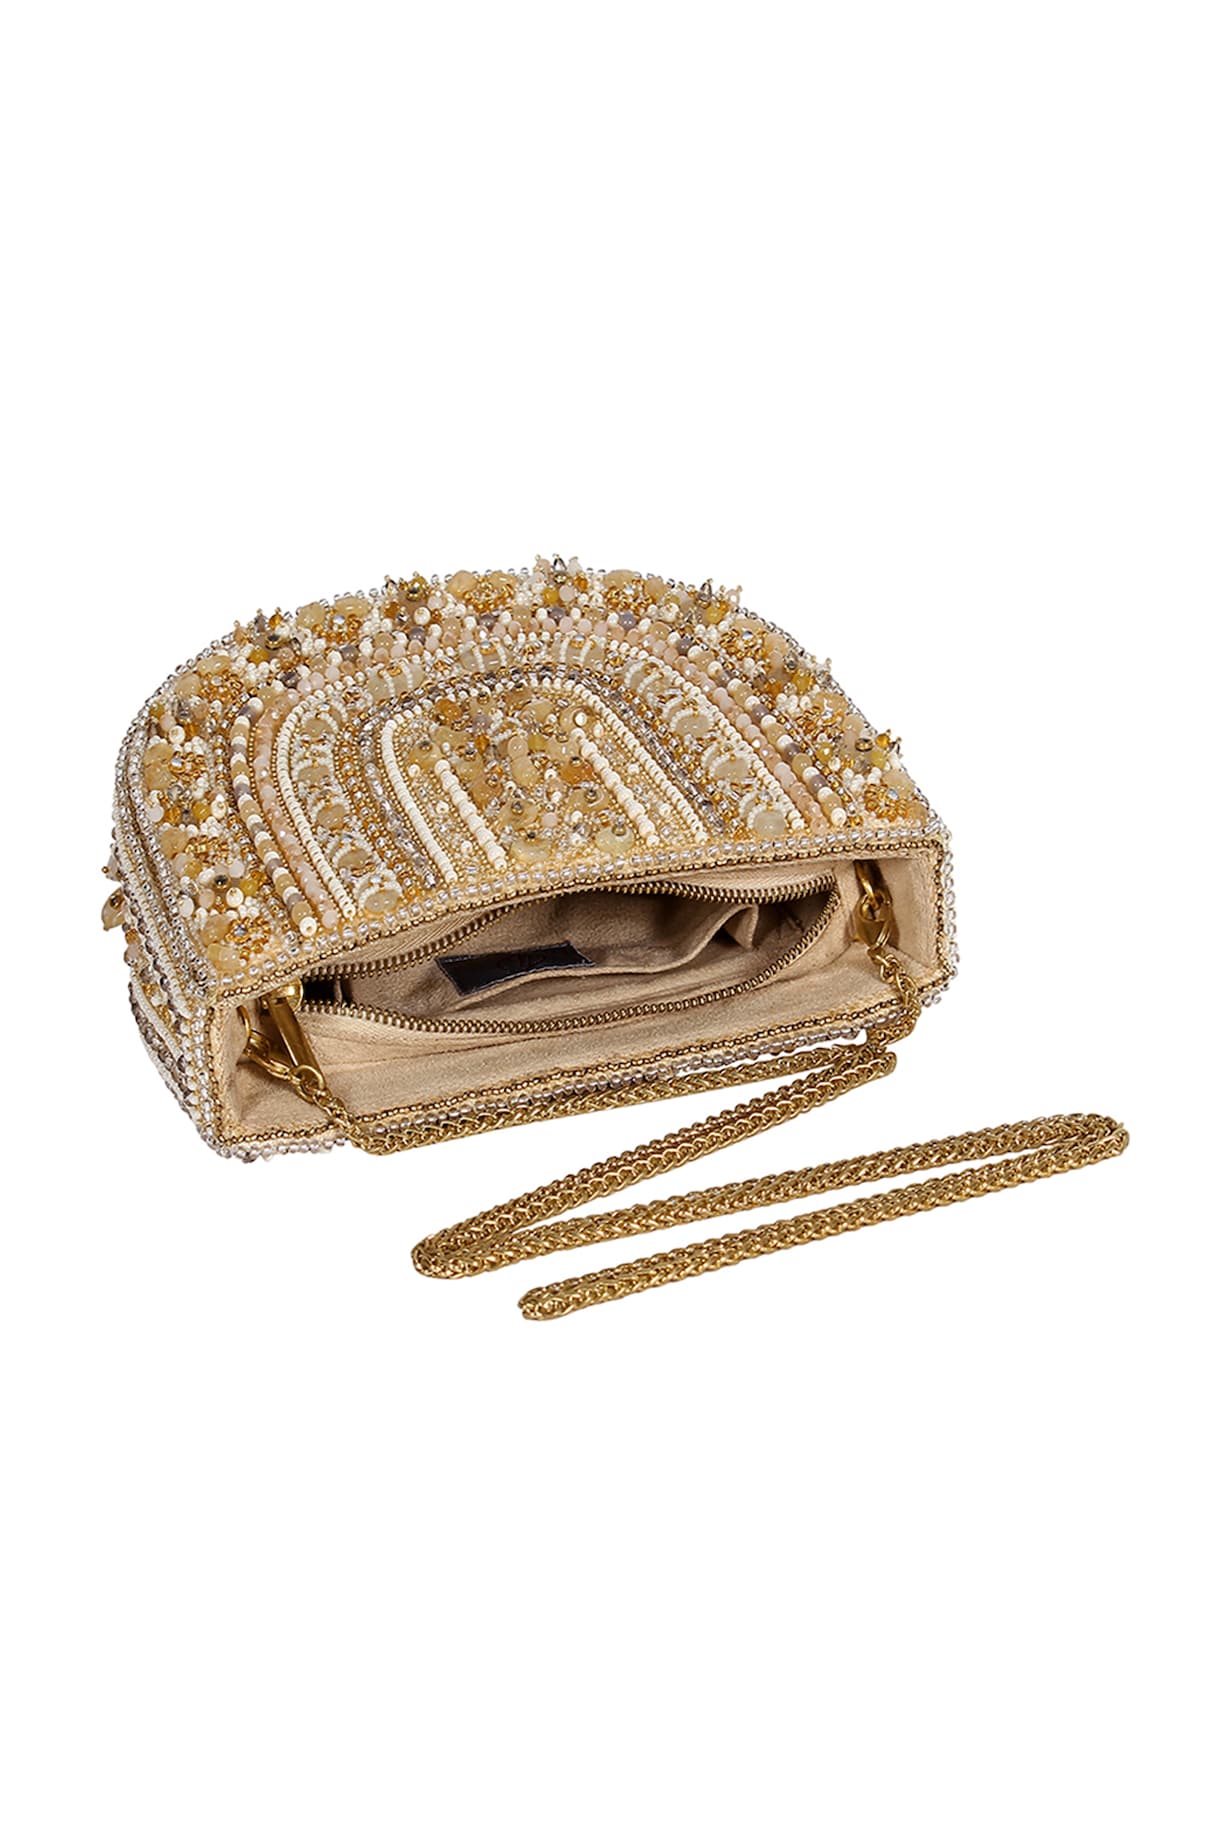 Lovetobag Ruche Soft Pouch - Peerless Gold With Handle